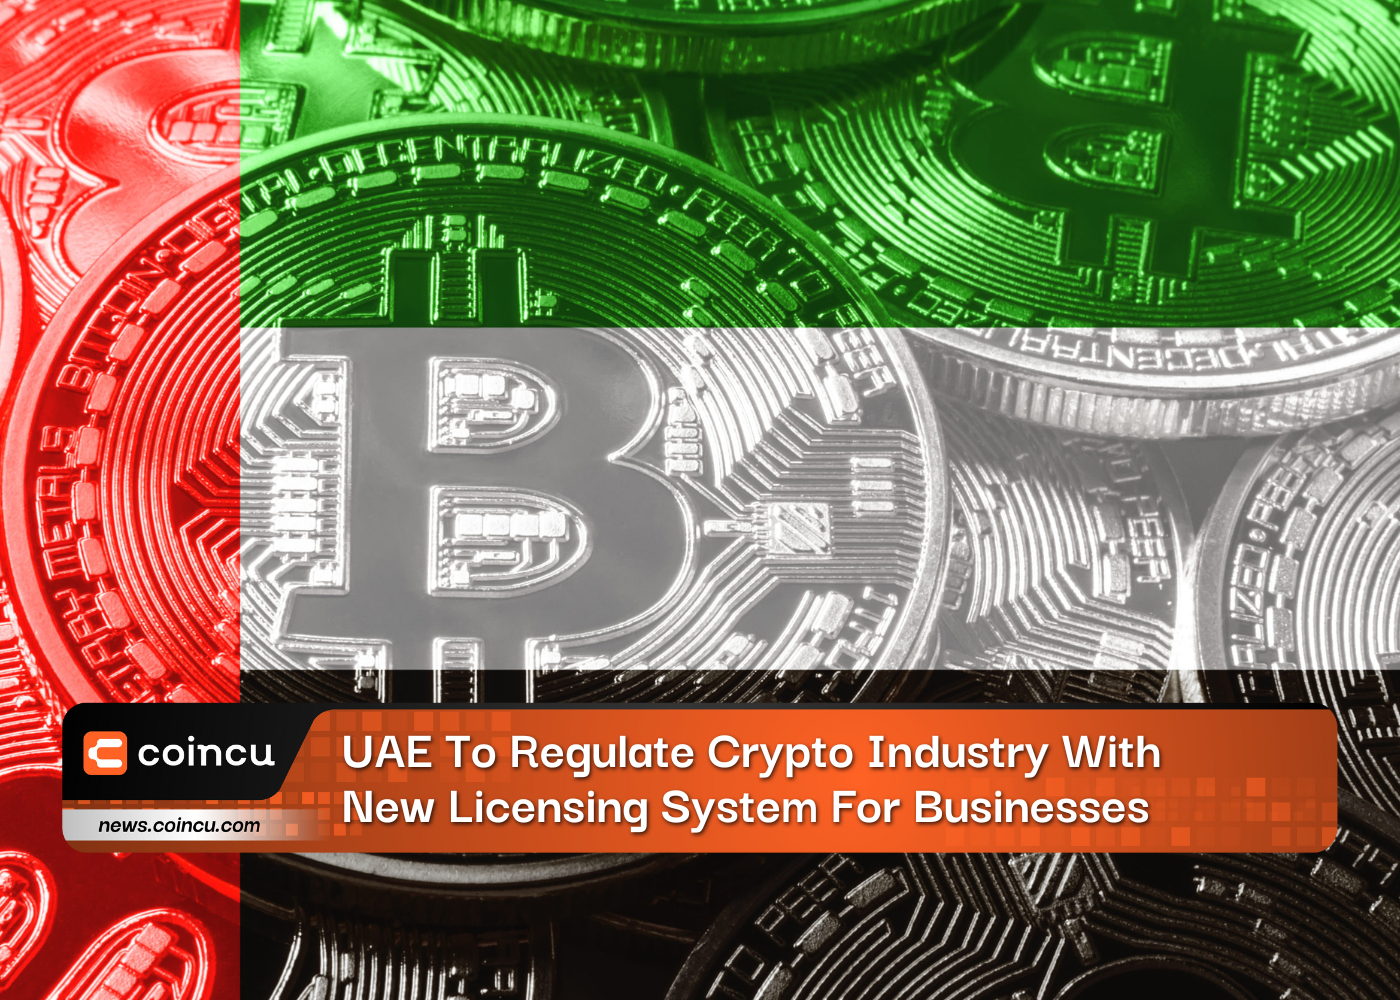 UAE To Regulate Crypto Industry With New Licensing System For Businesses